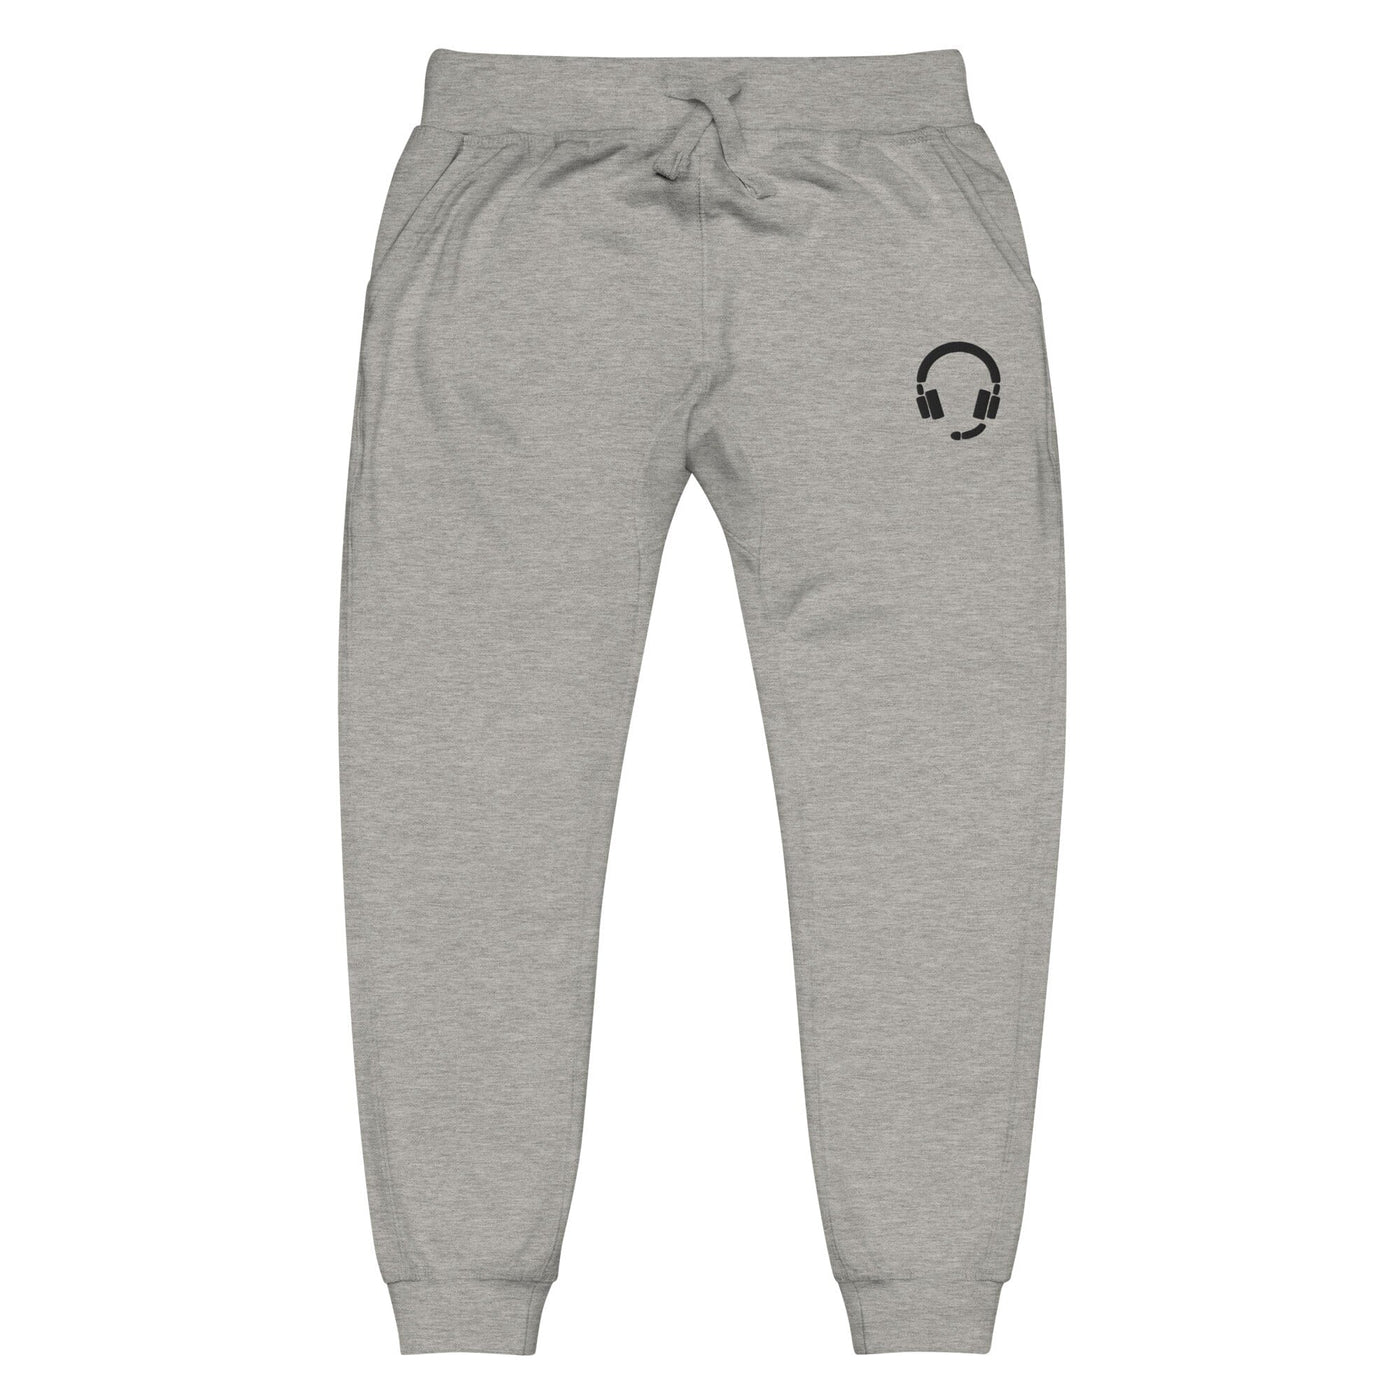 GLHF Headset | Unisex fleece sweatpants | Gamer Affirmations Threads & Thistles Inventory Carbon Grey XS 